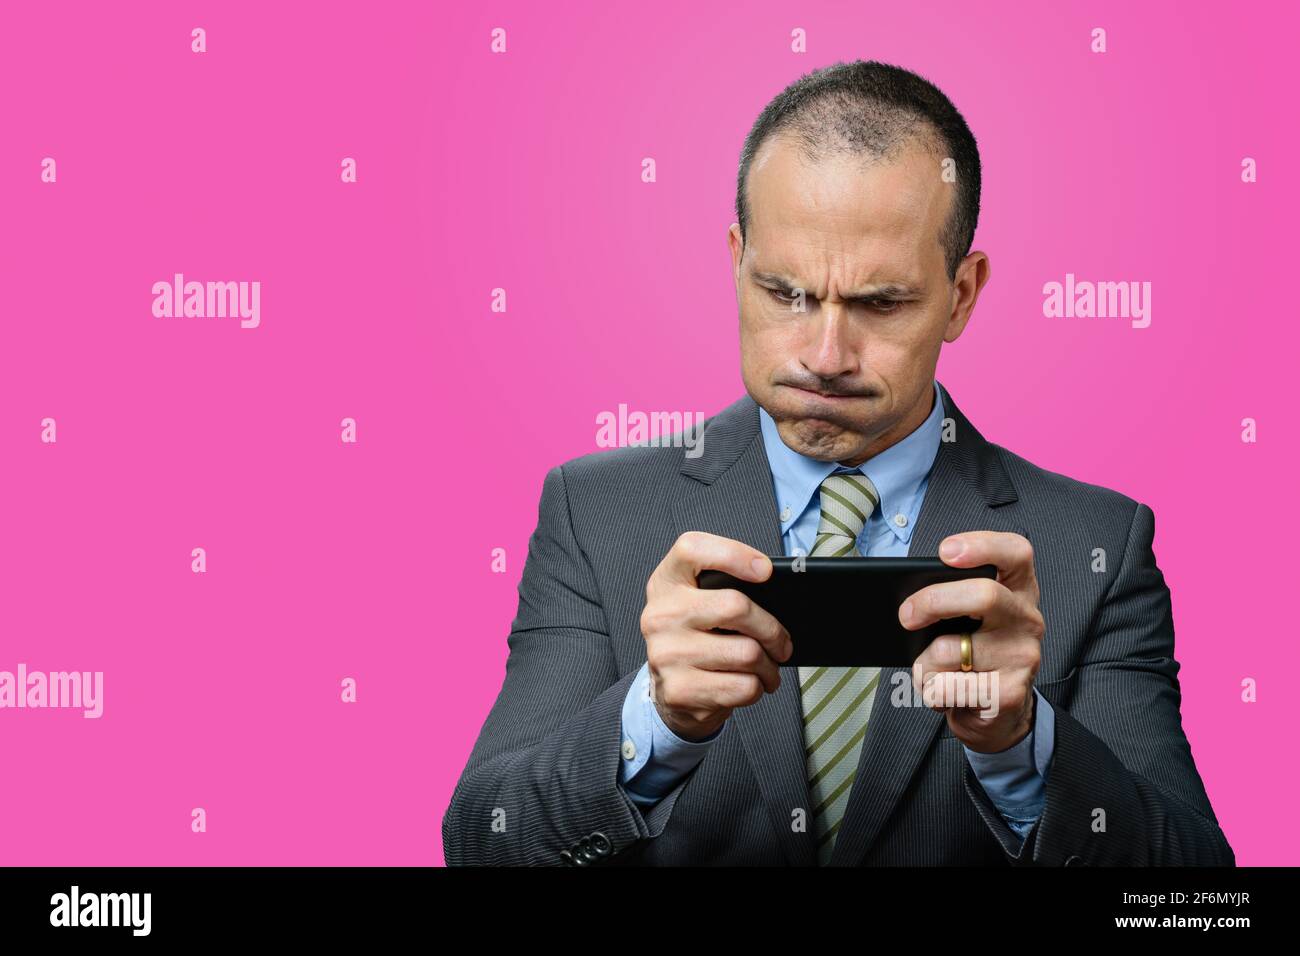 Mature man with suit and tie, playing on his smartphone and breathing through his nose. Pink background. Stock Photo